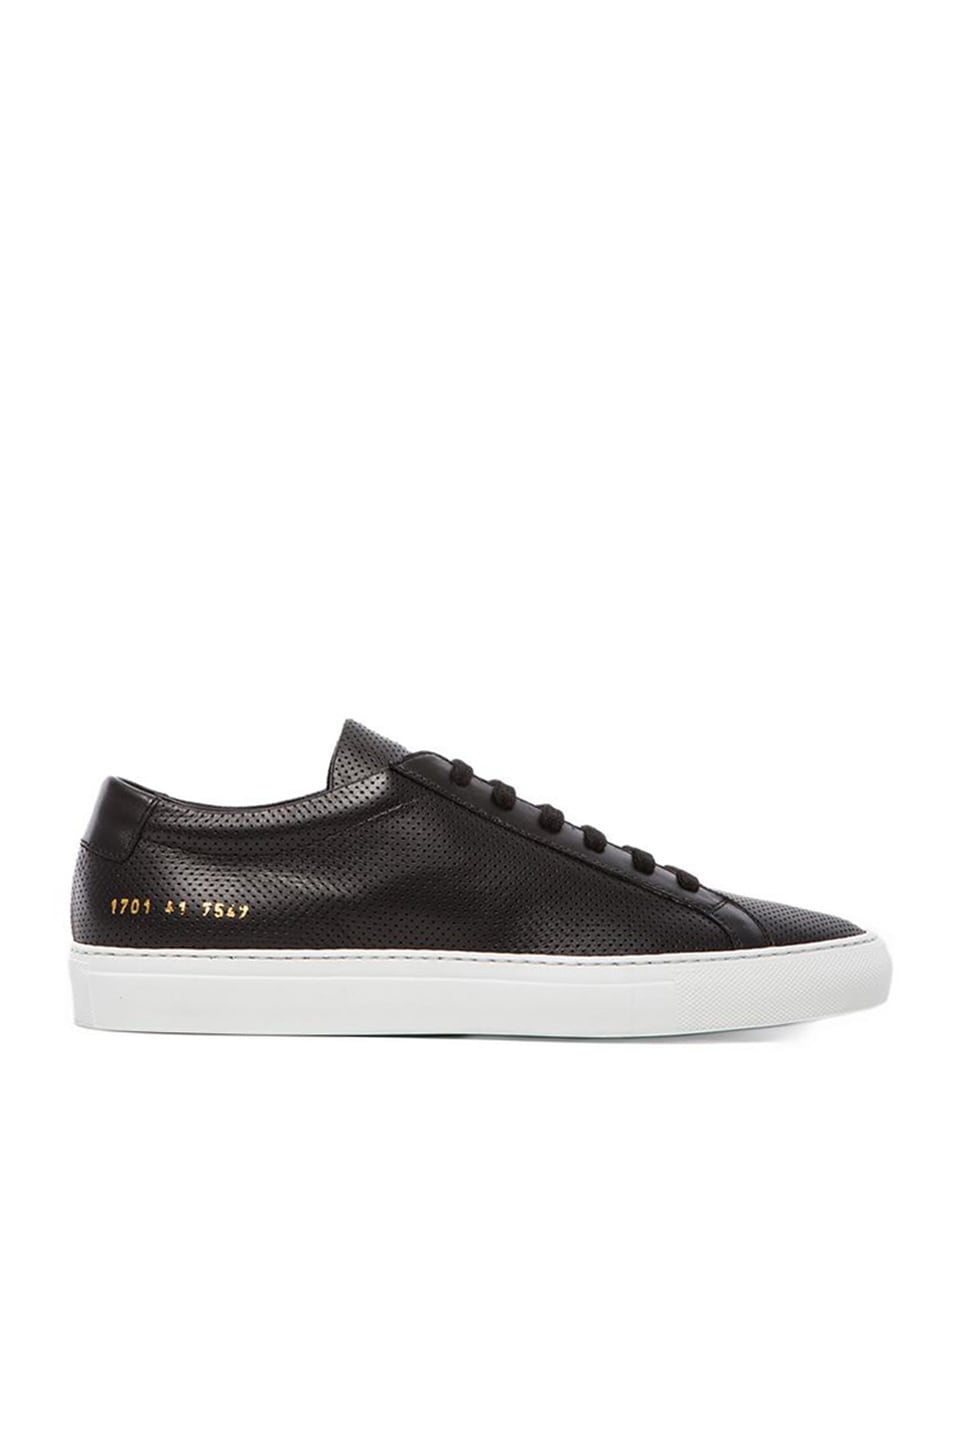 COMMON PROJECTS ORIGINAL ACHILLES PERFORATED, BLACK | ModeSens